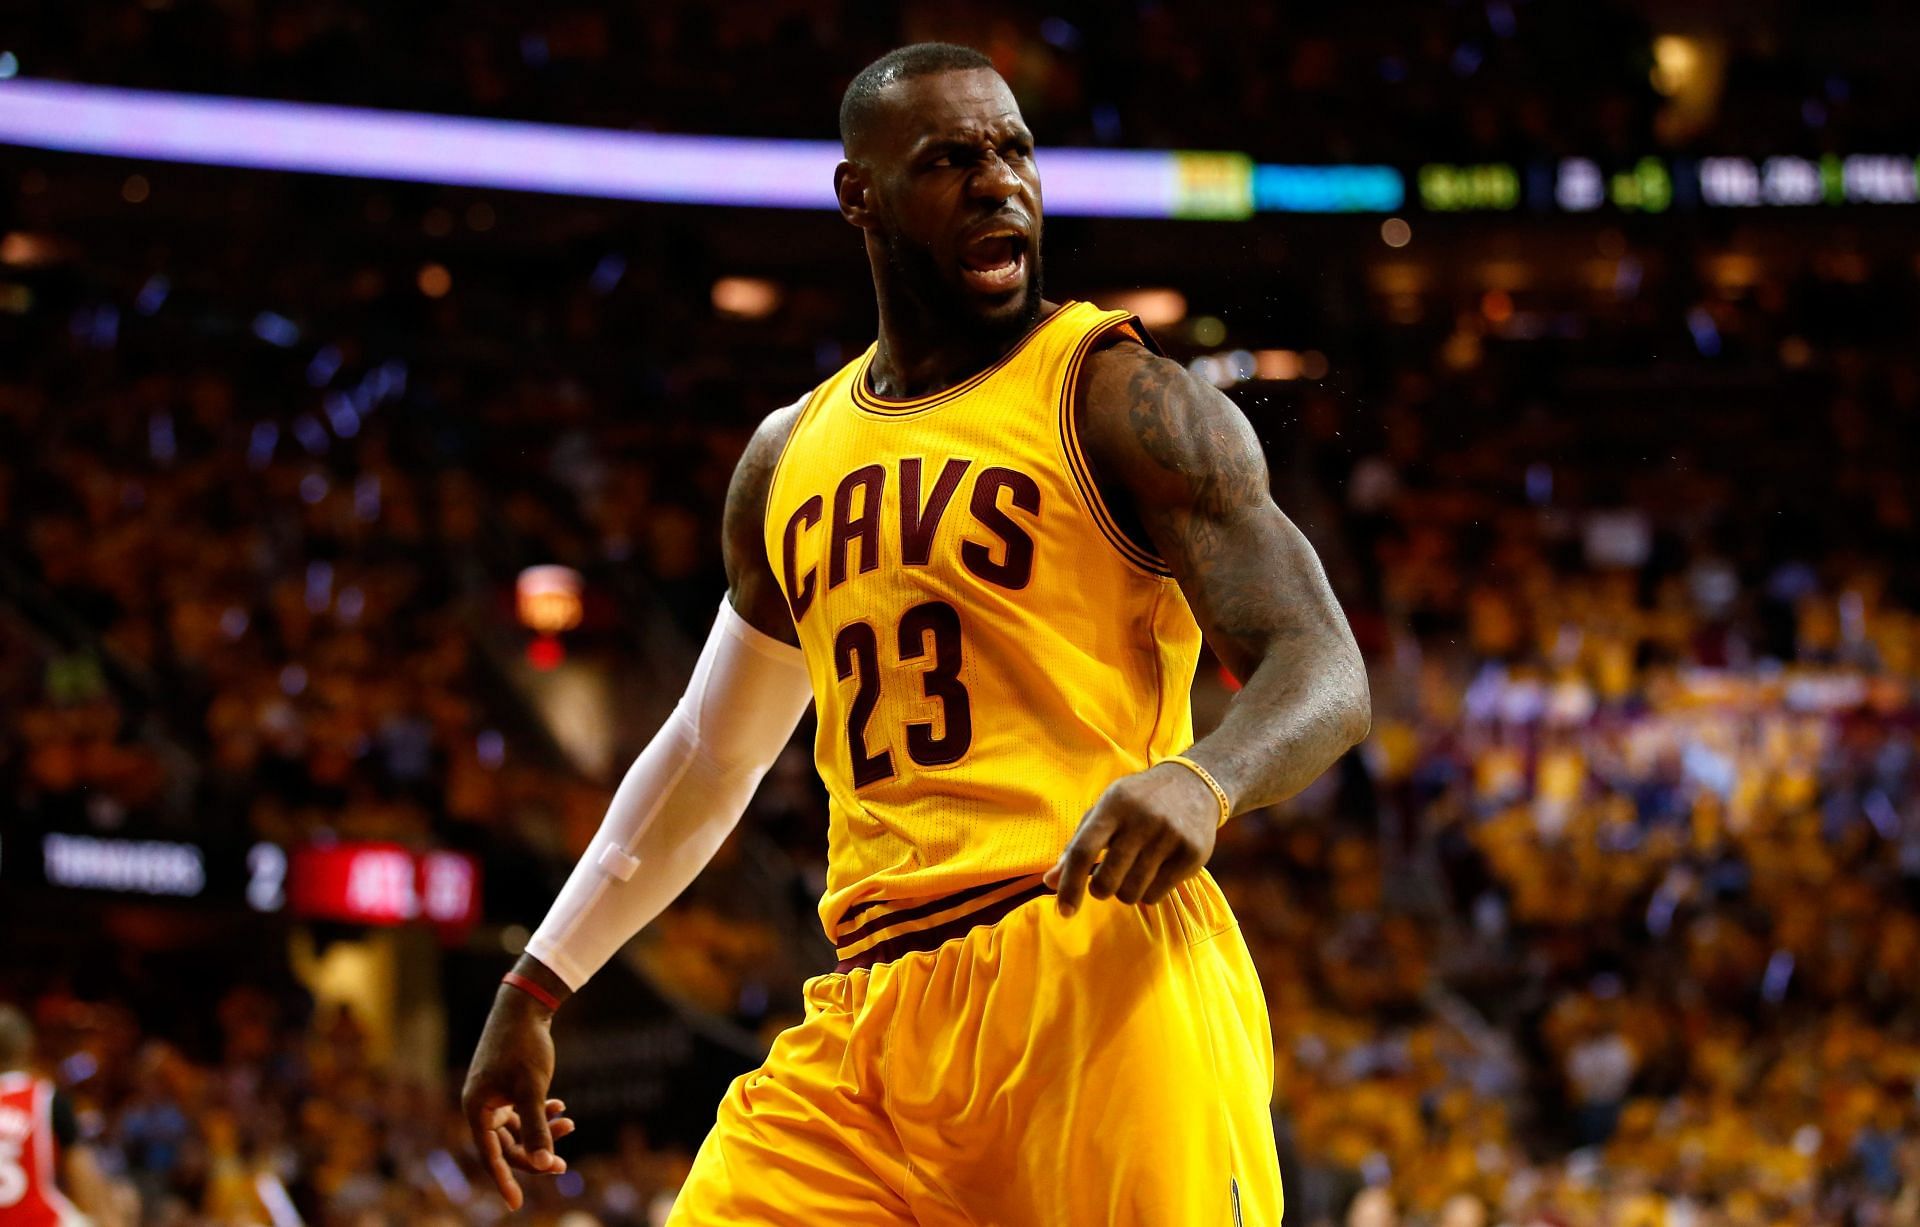 LeBron James playing for the Cleveland Cavaliers.